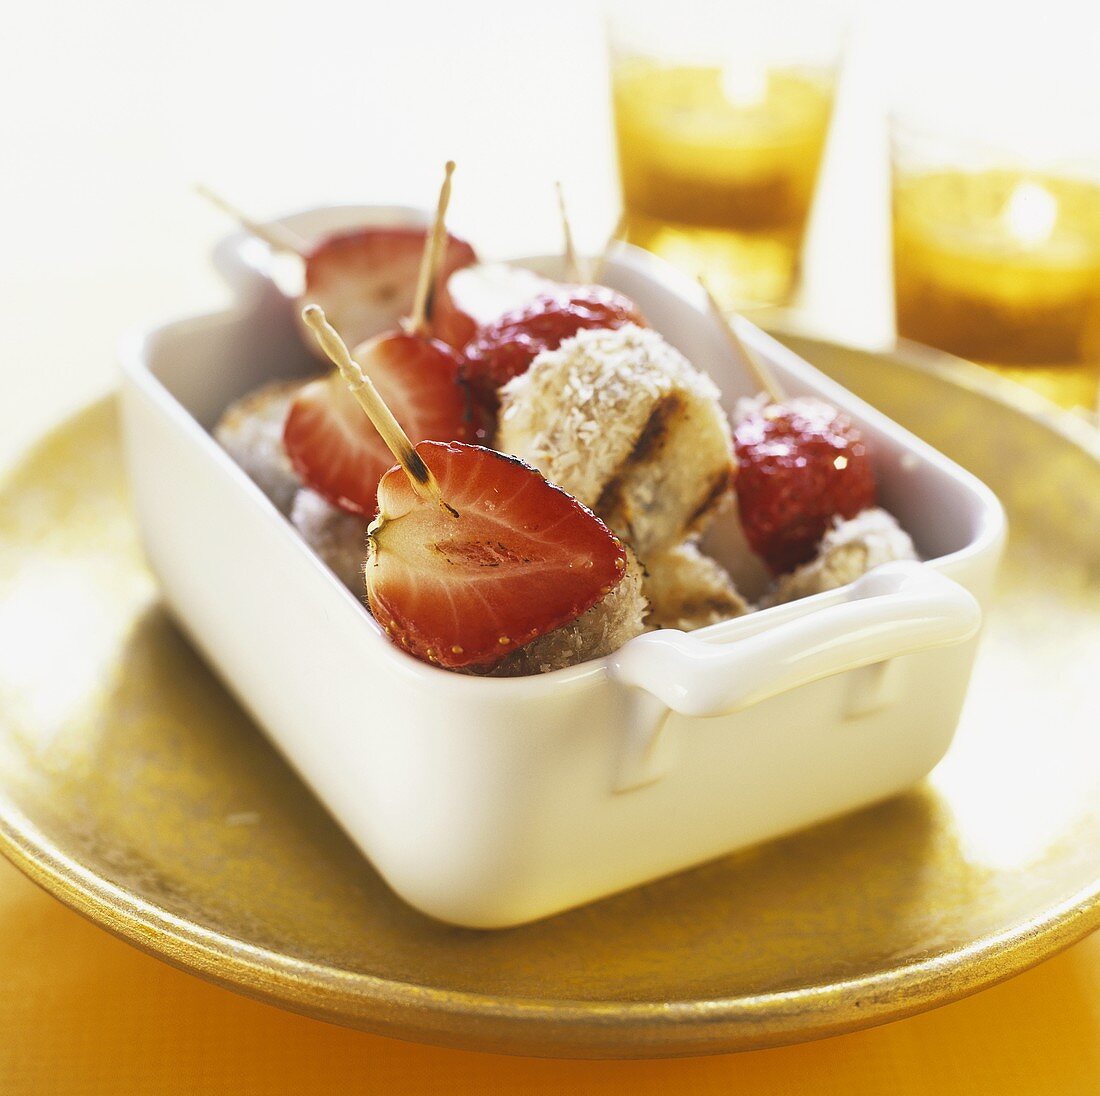 Grilled strawberries and coconut-coated bananas on skewers